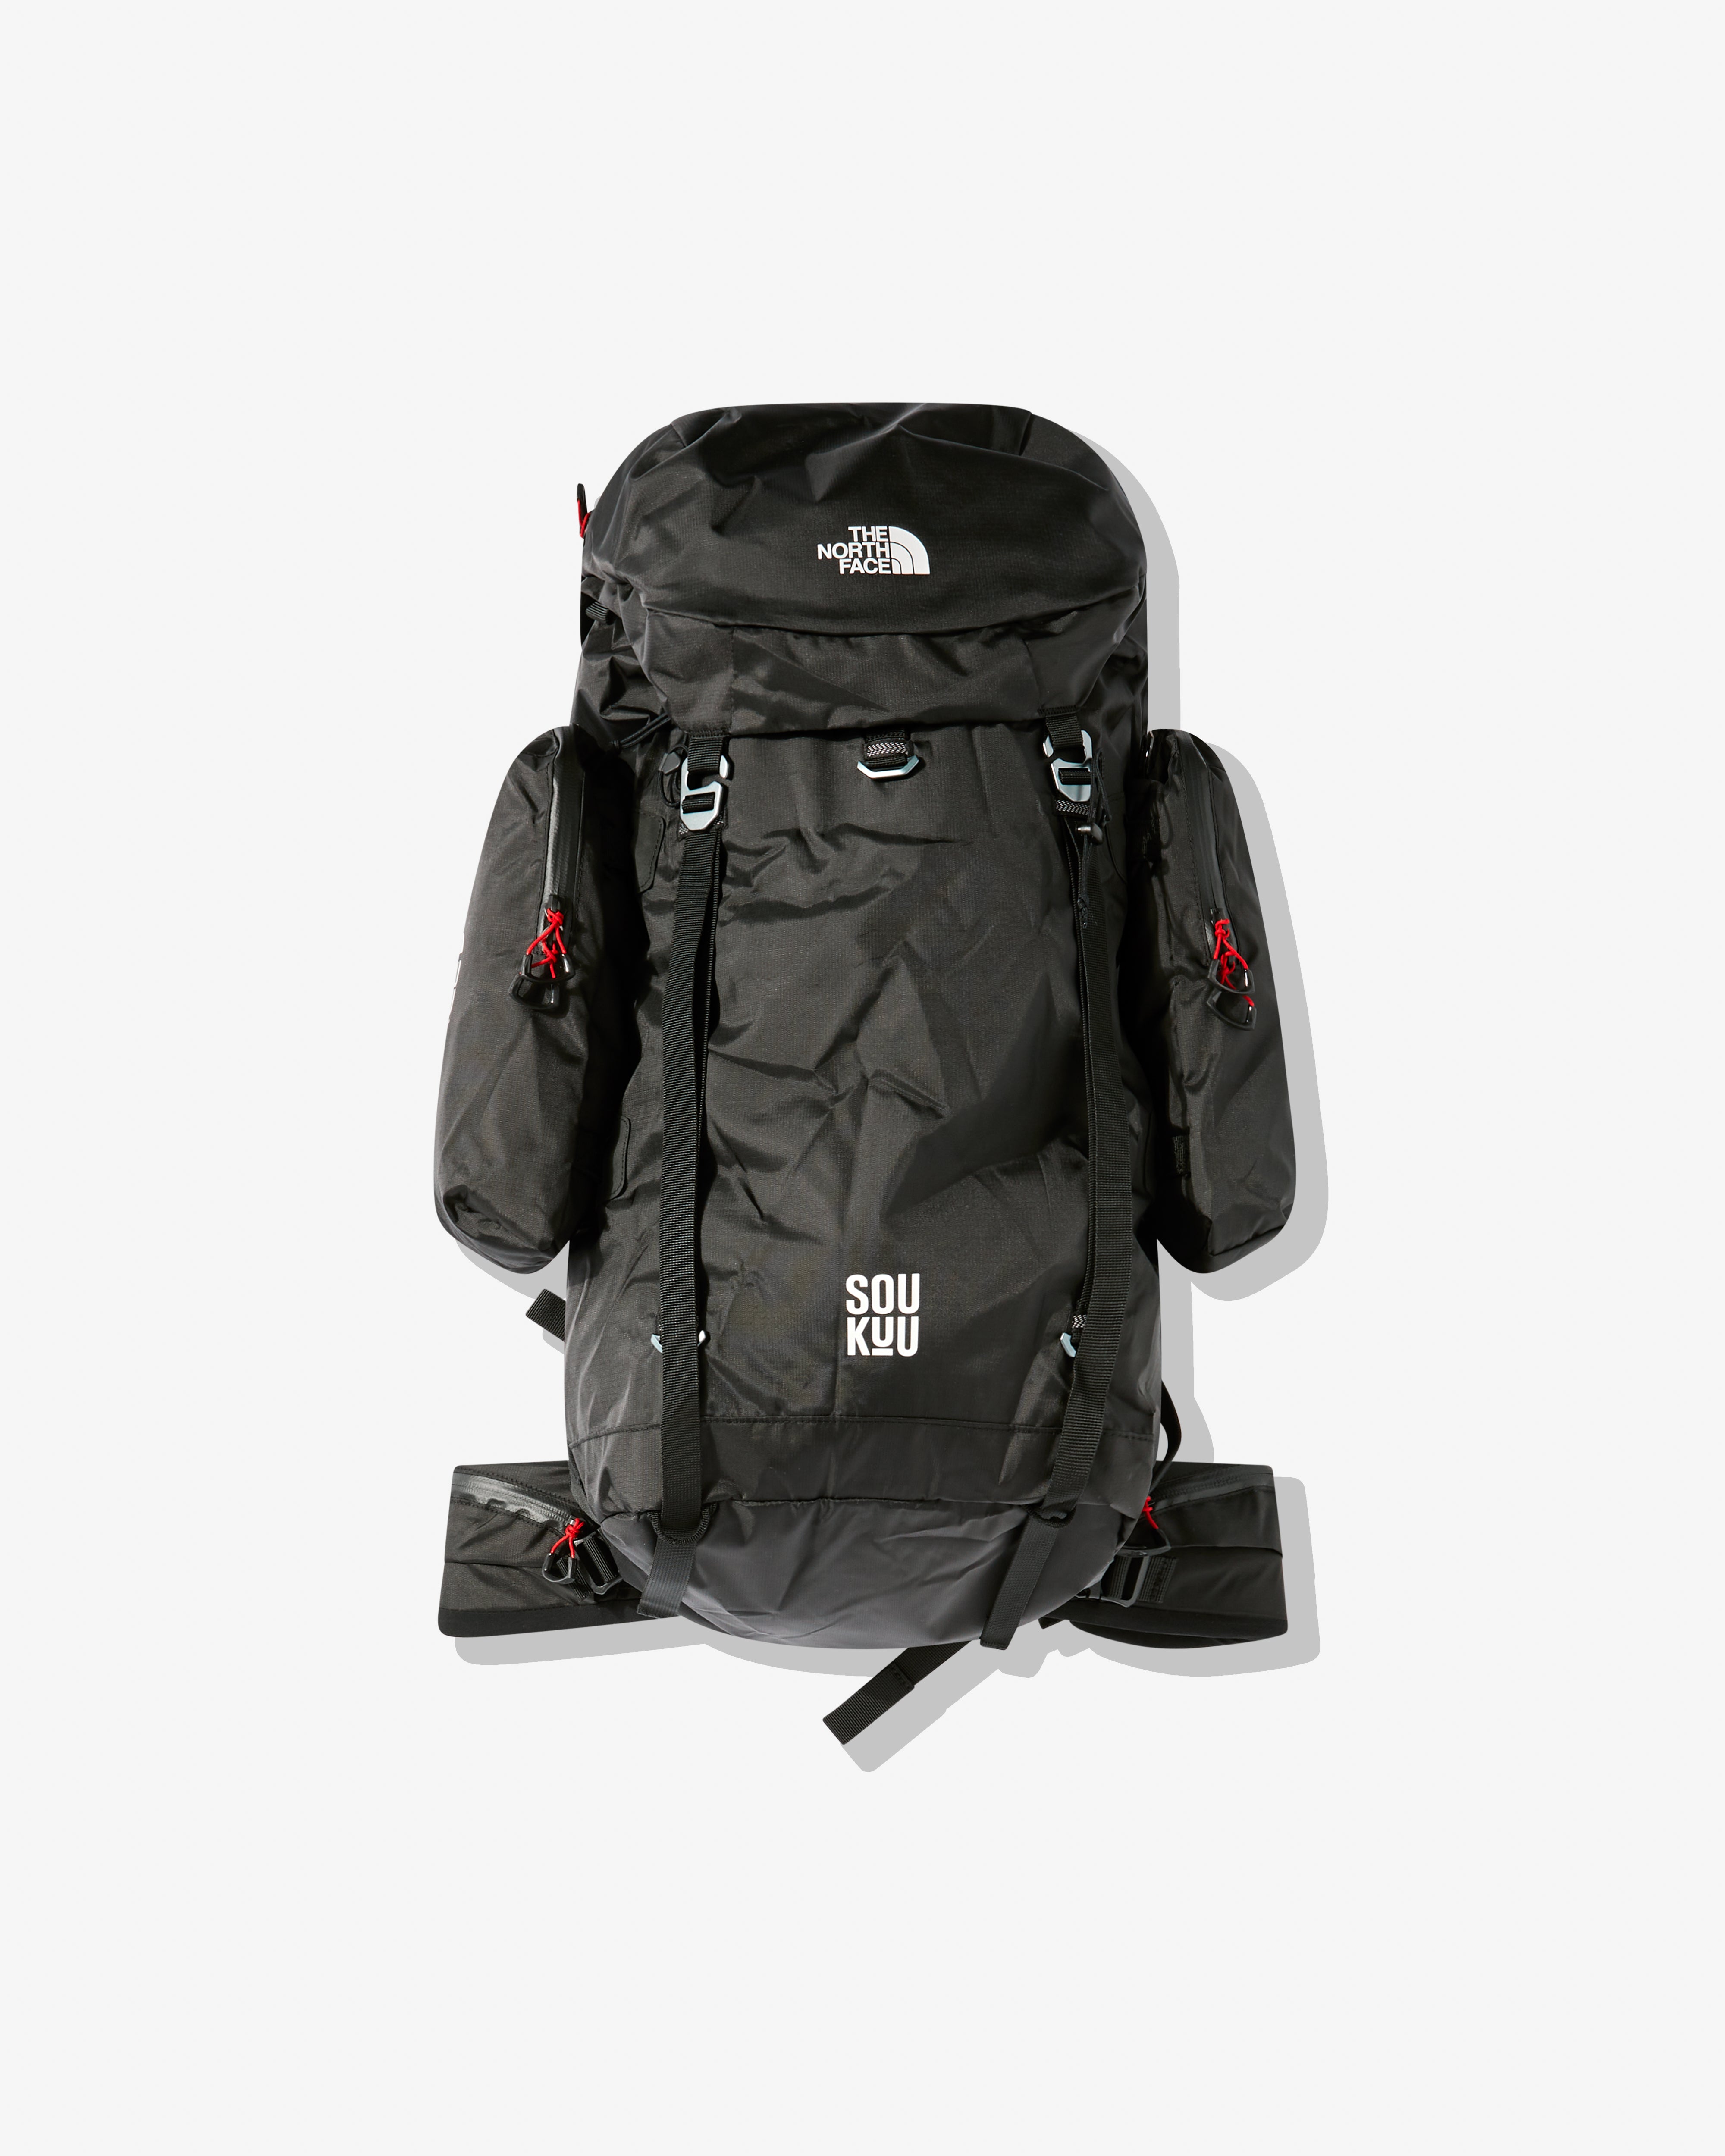 The North Face - Men's Undercover Soukuu Hike 38L Backpack 